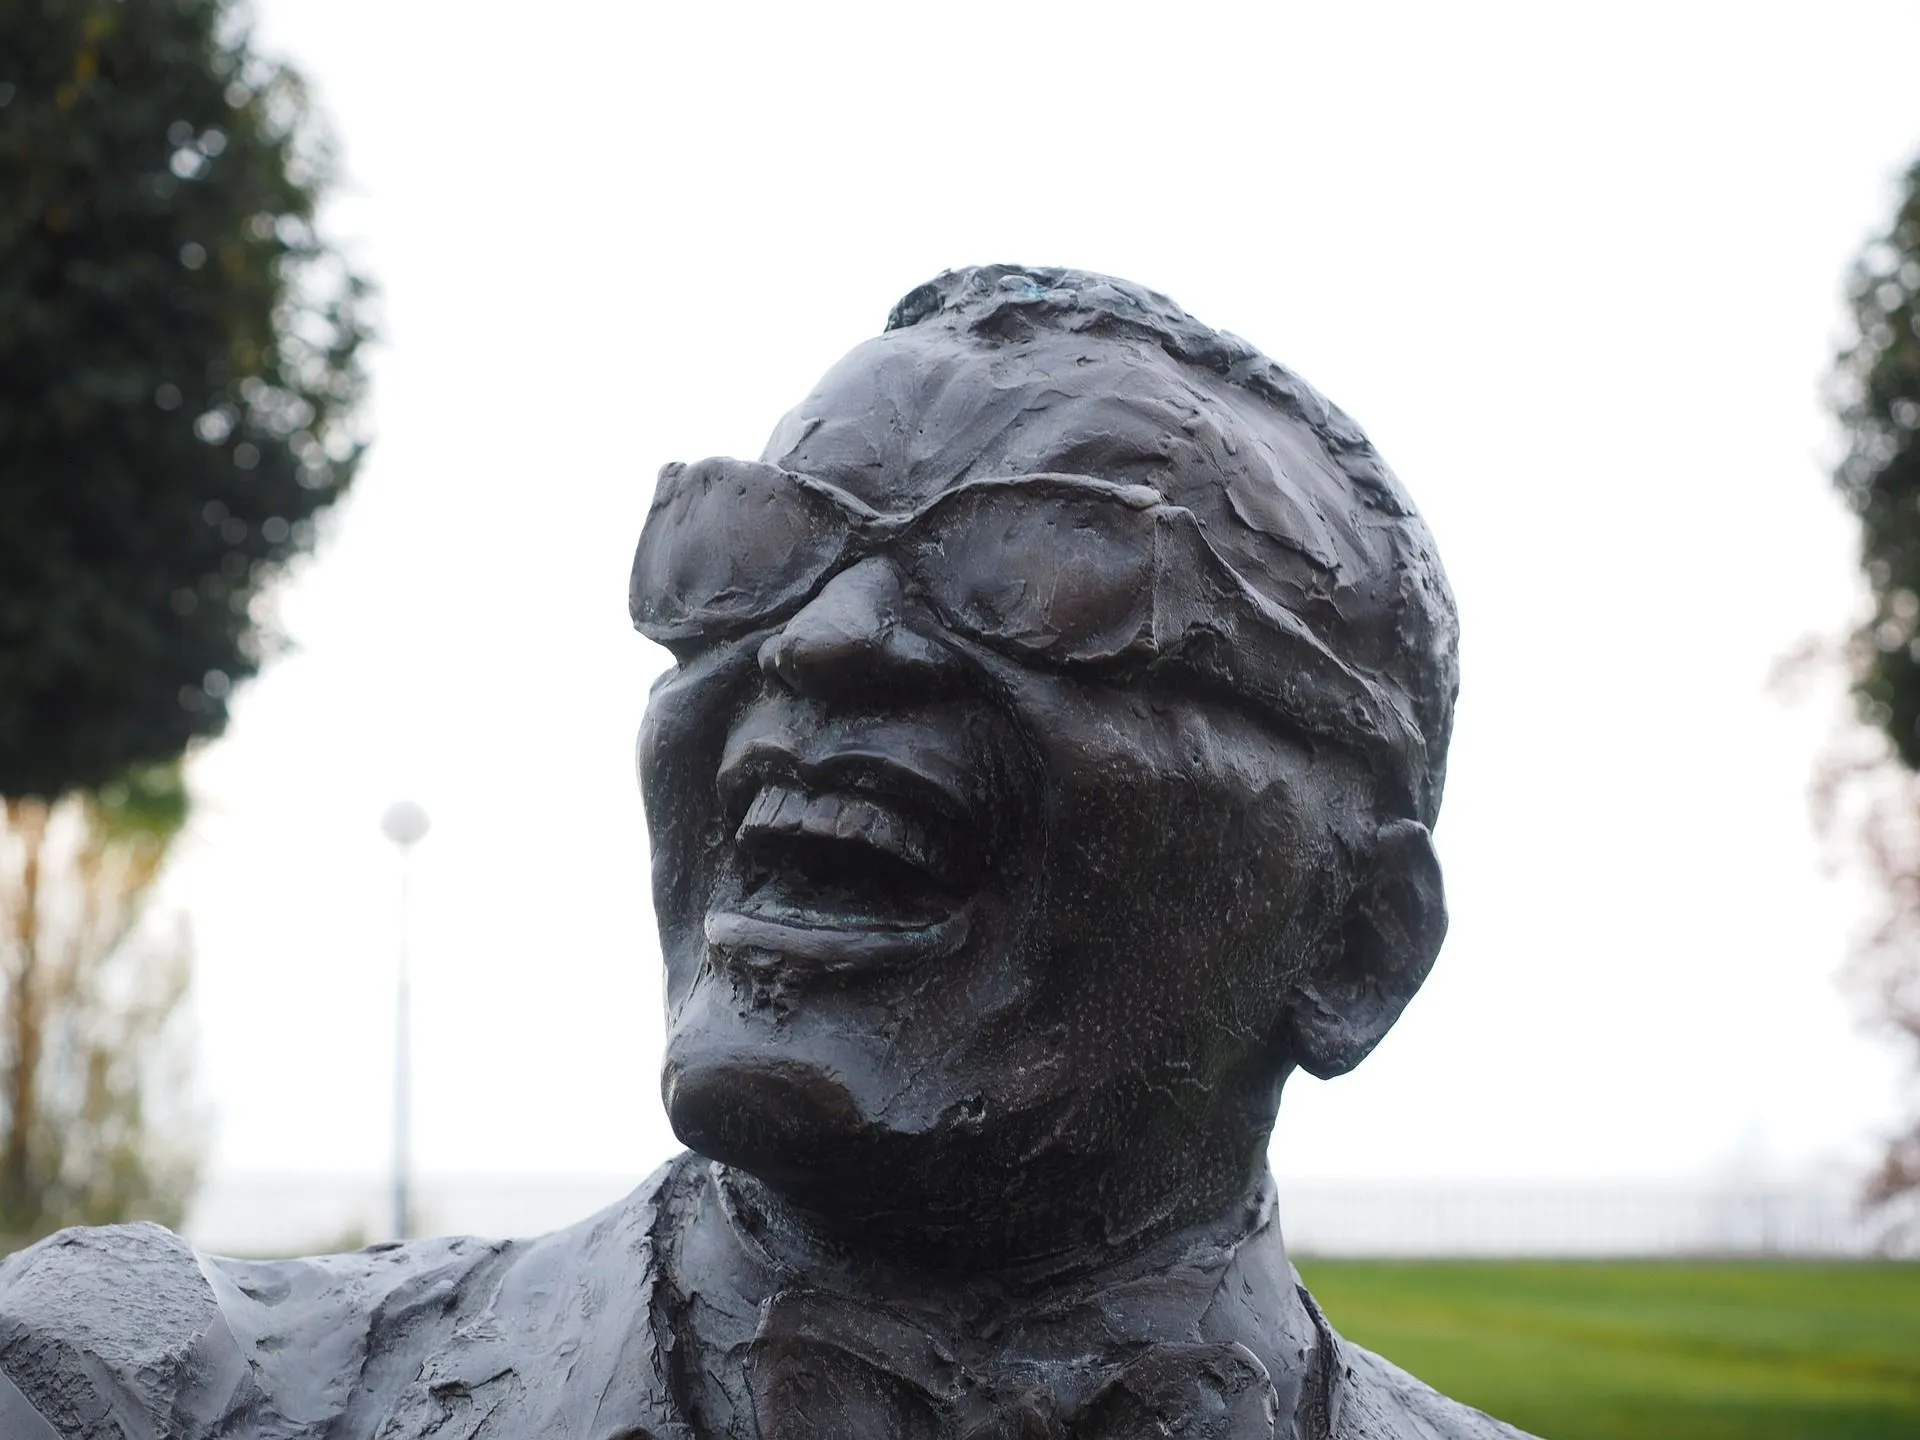 Ray Charles' Statue can be found in The Ray Charles Memorial in Greenville, Florida.